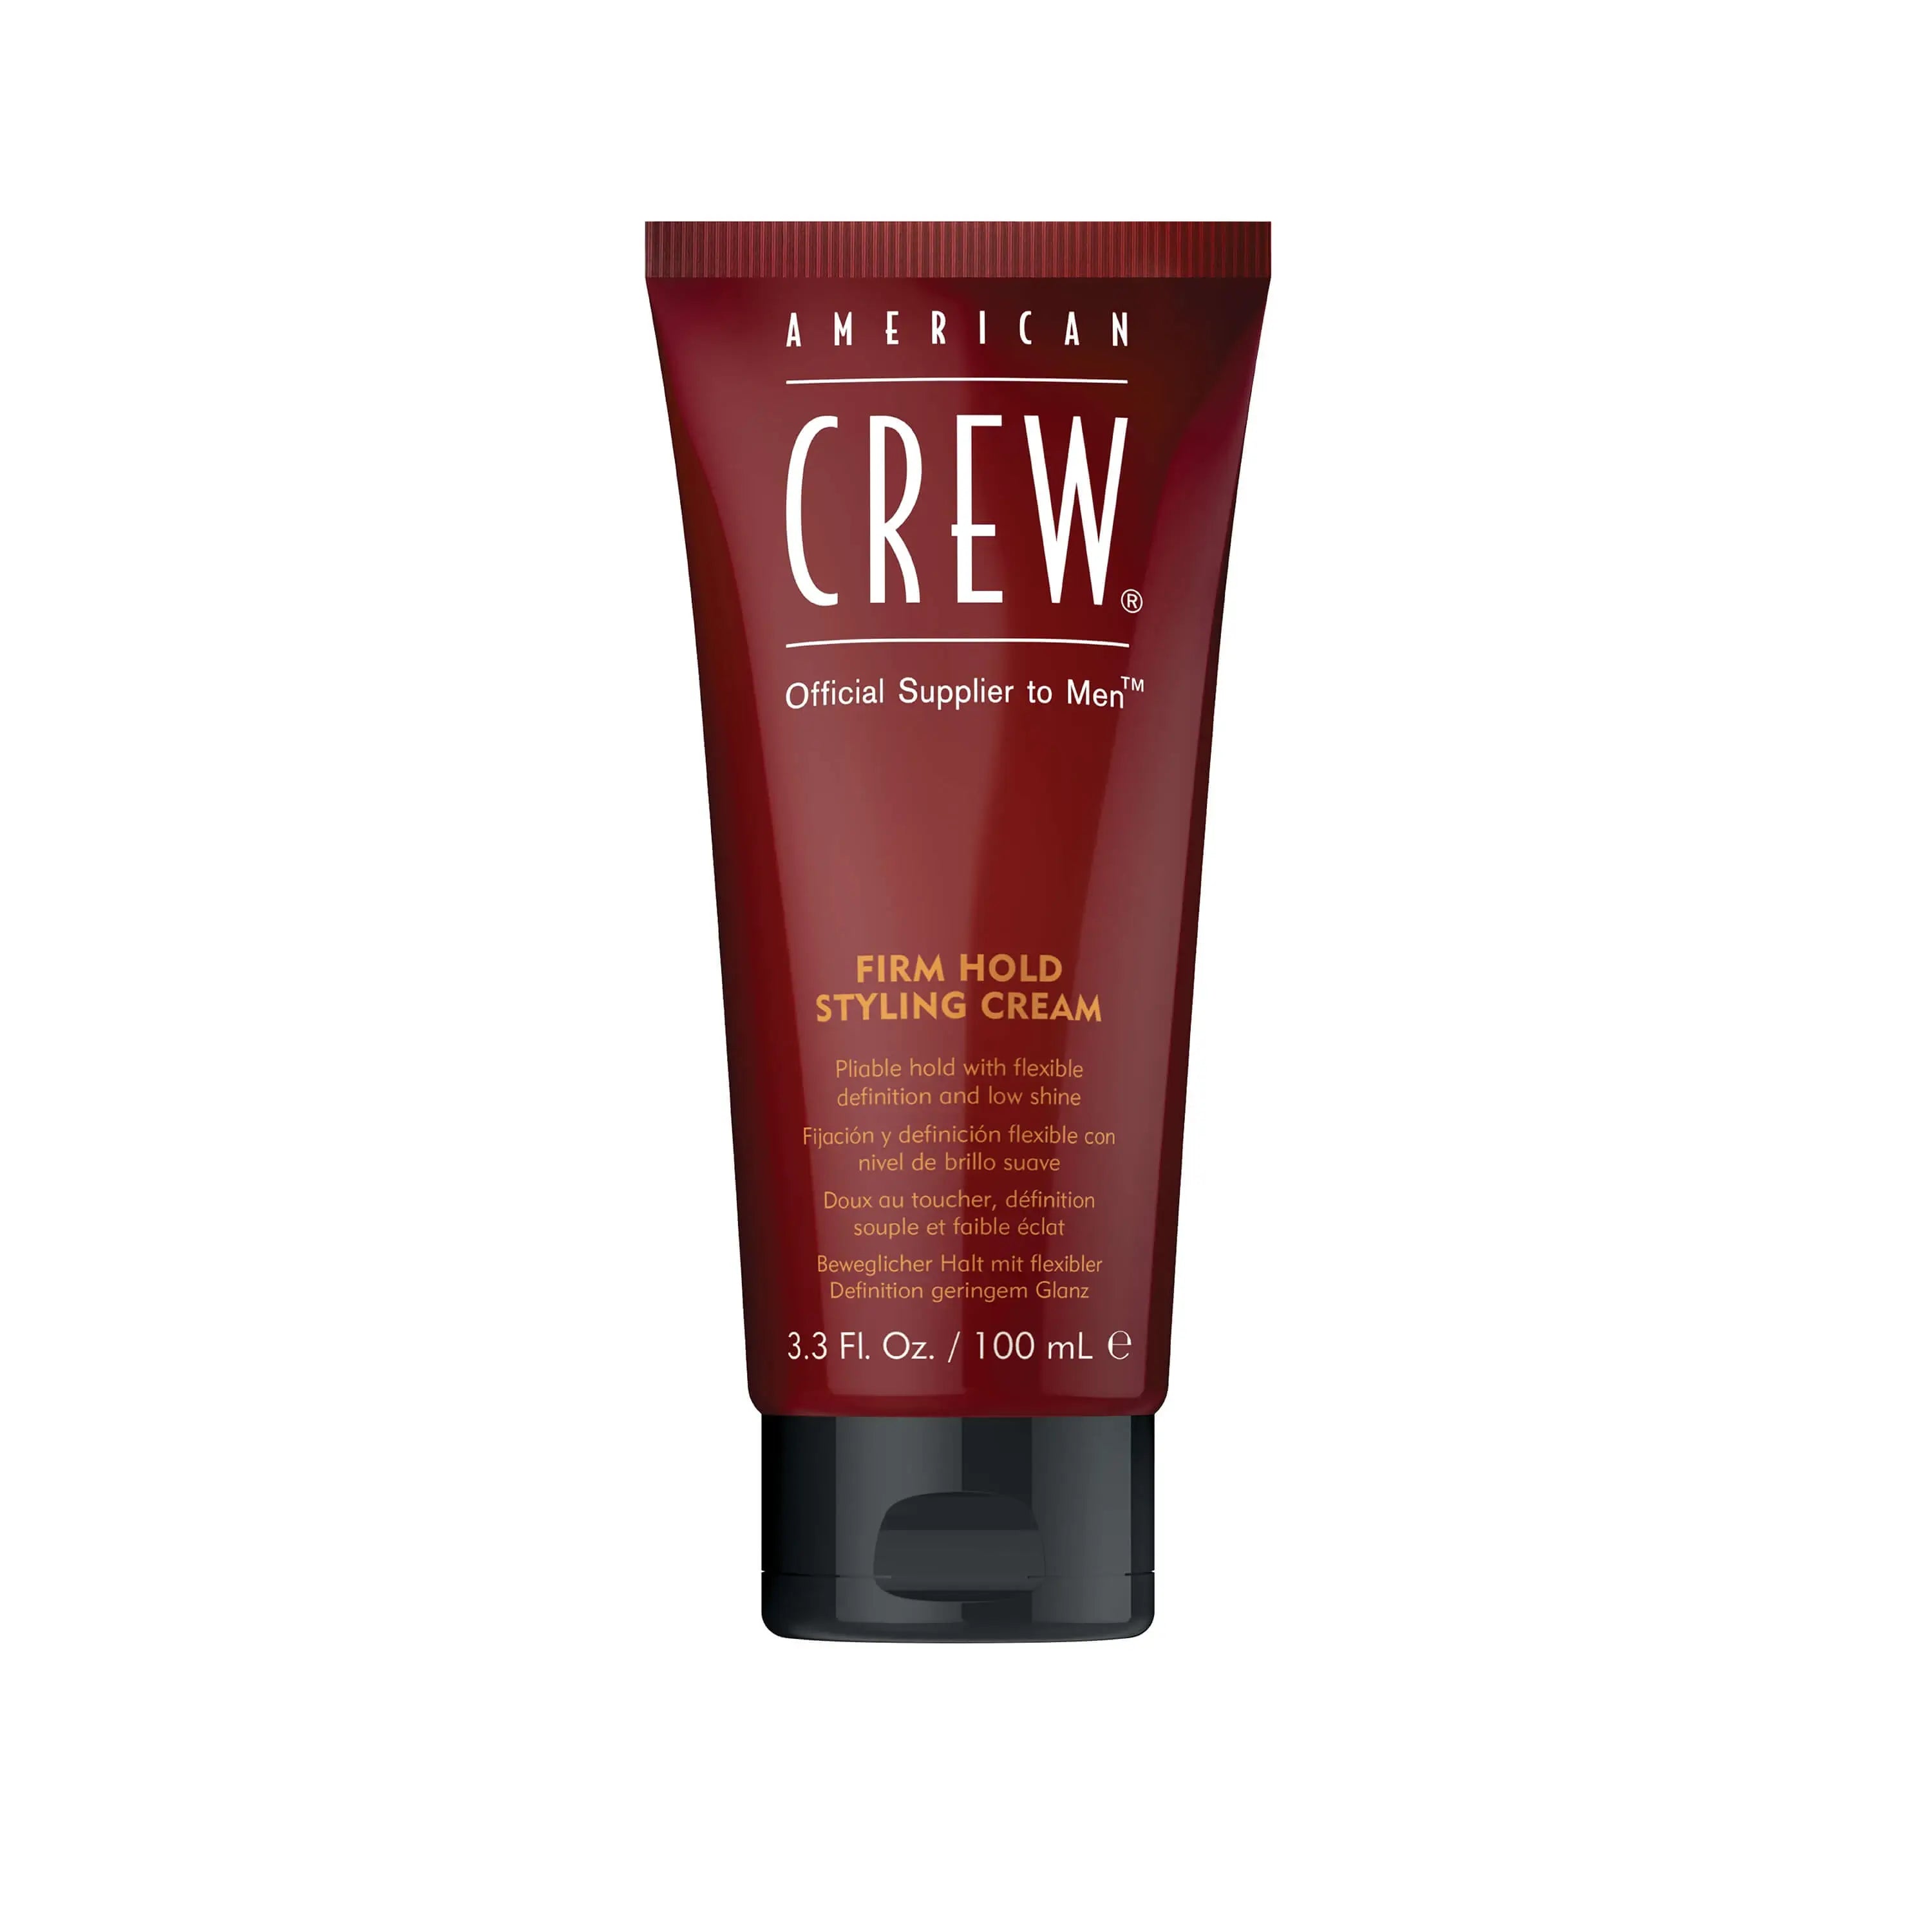 Firm Hold Styling Cream - American Crew